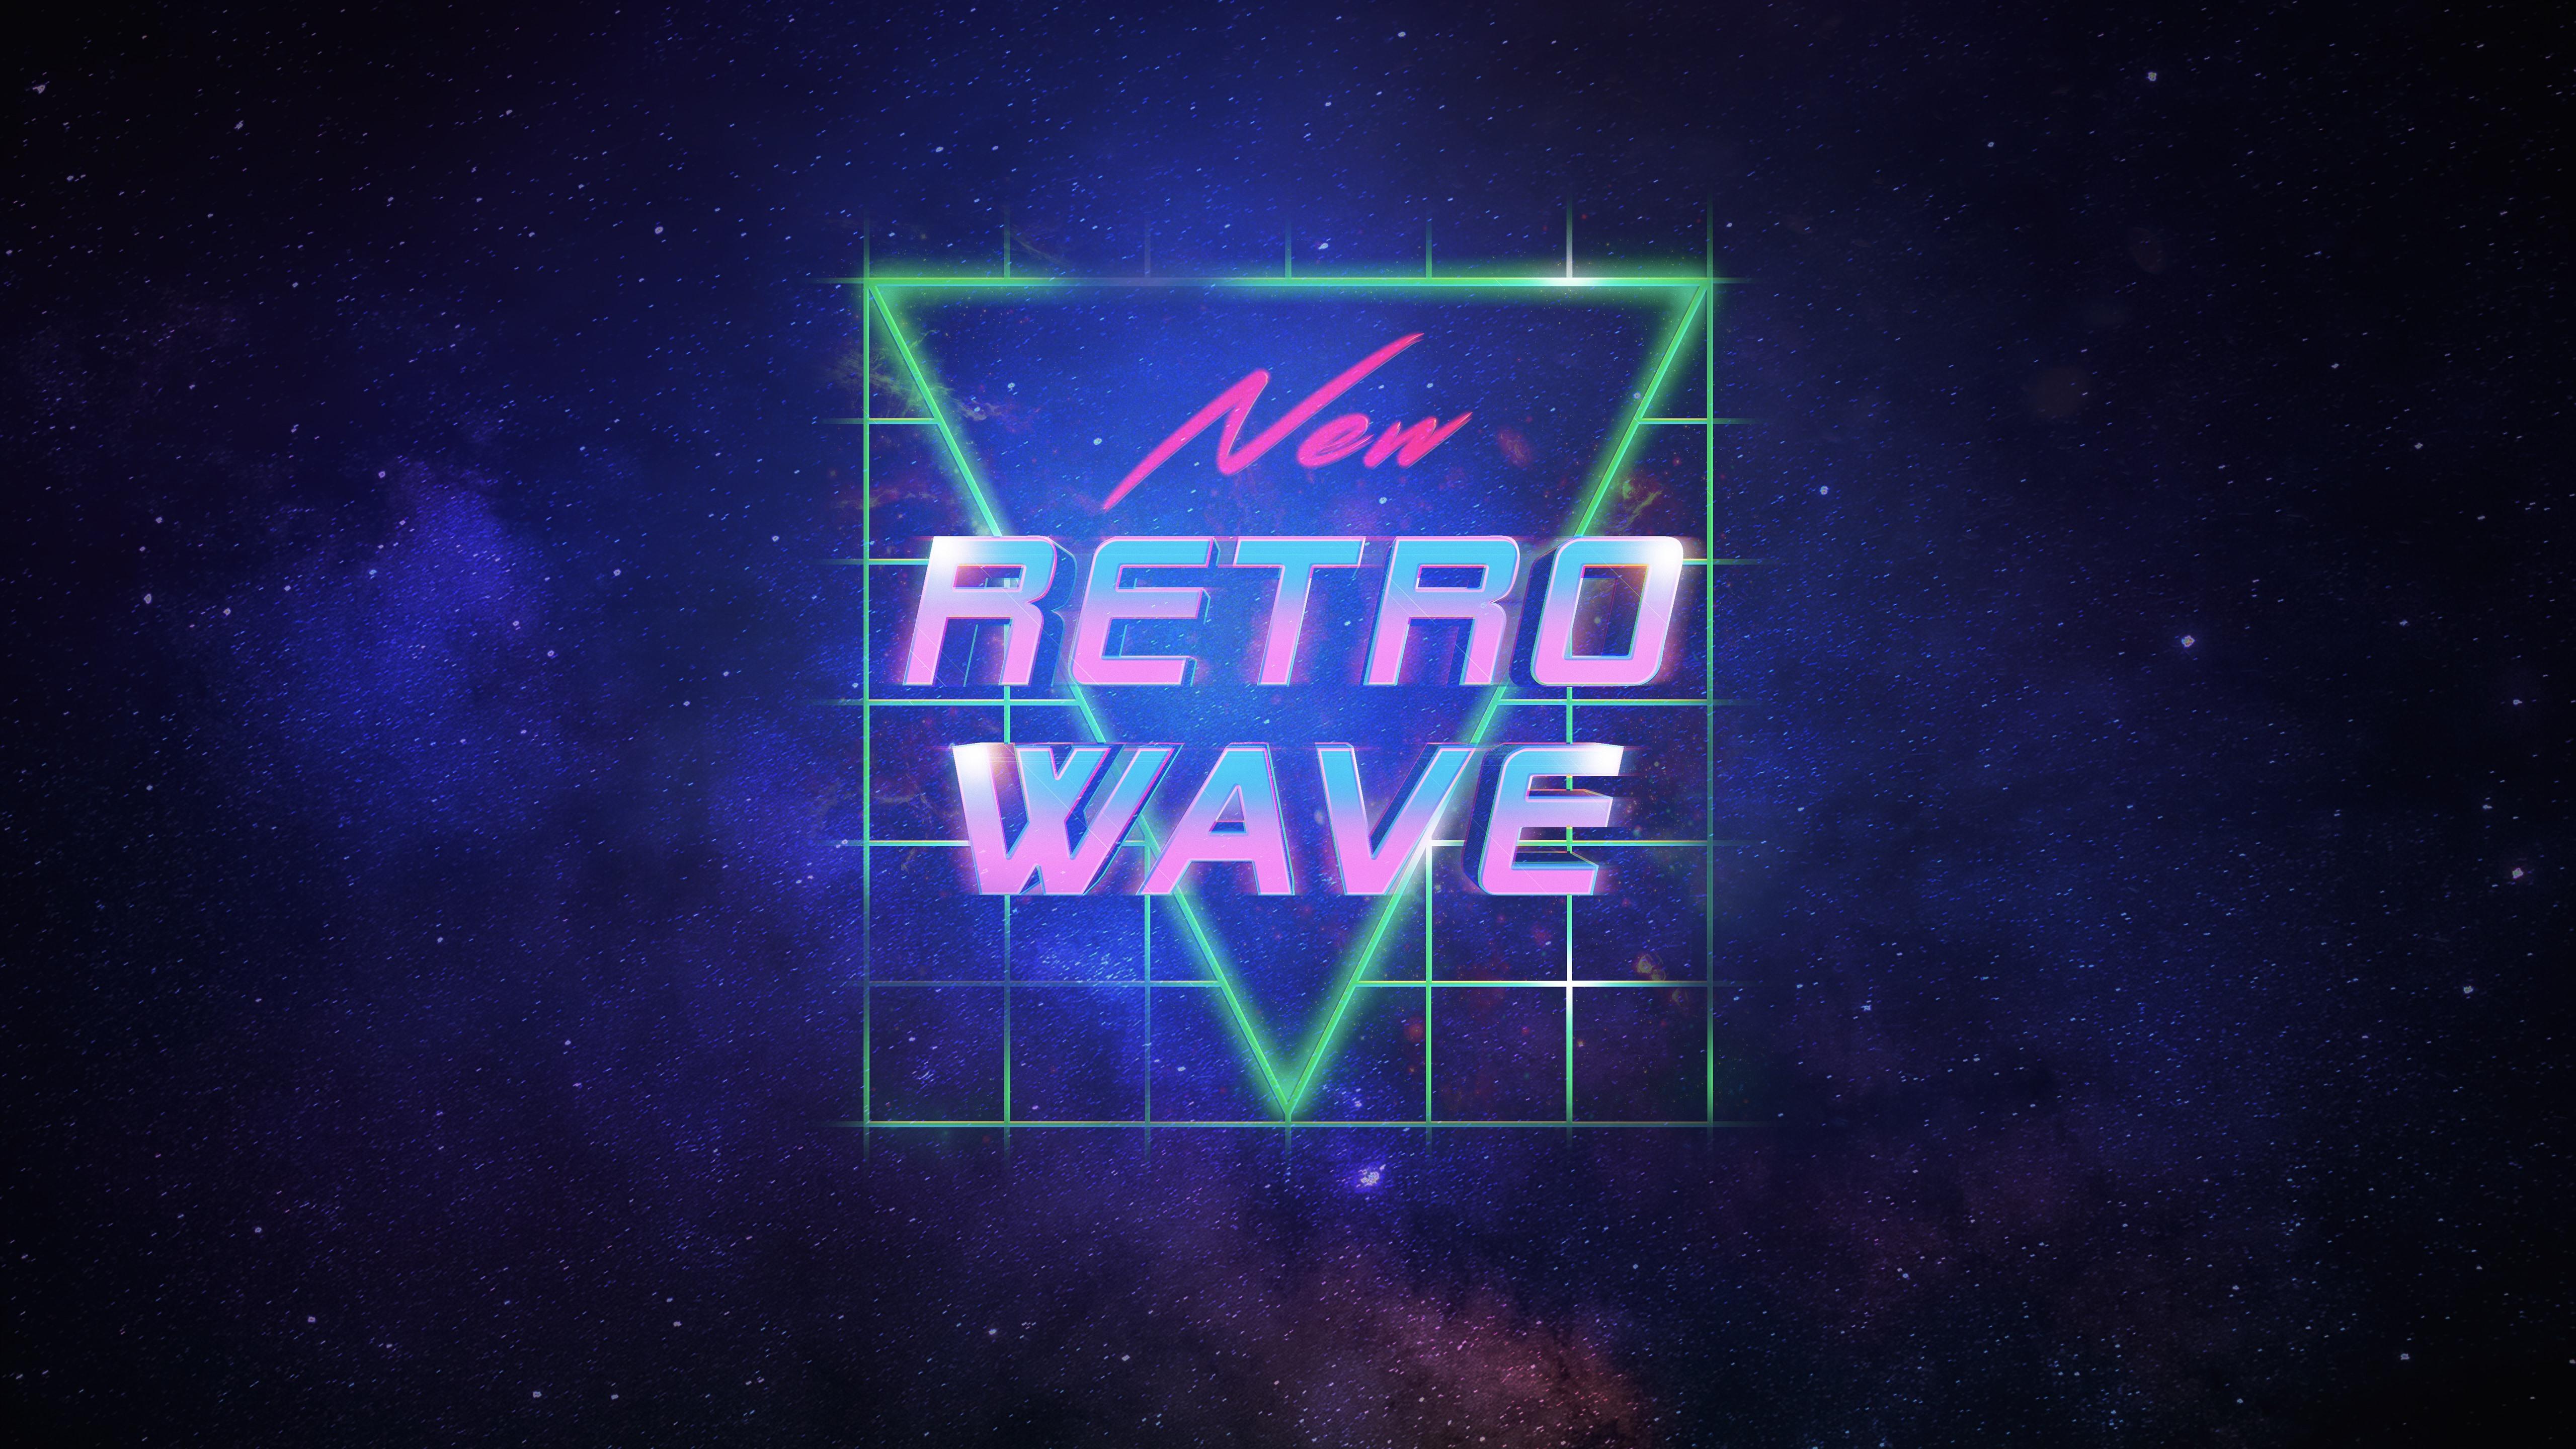 New Retro Wave, Synth Pop 1242x2688 IPhone 11 Pro XS Max Wallpaper, Background, Picture, Image